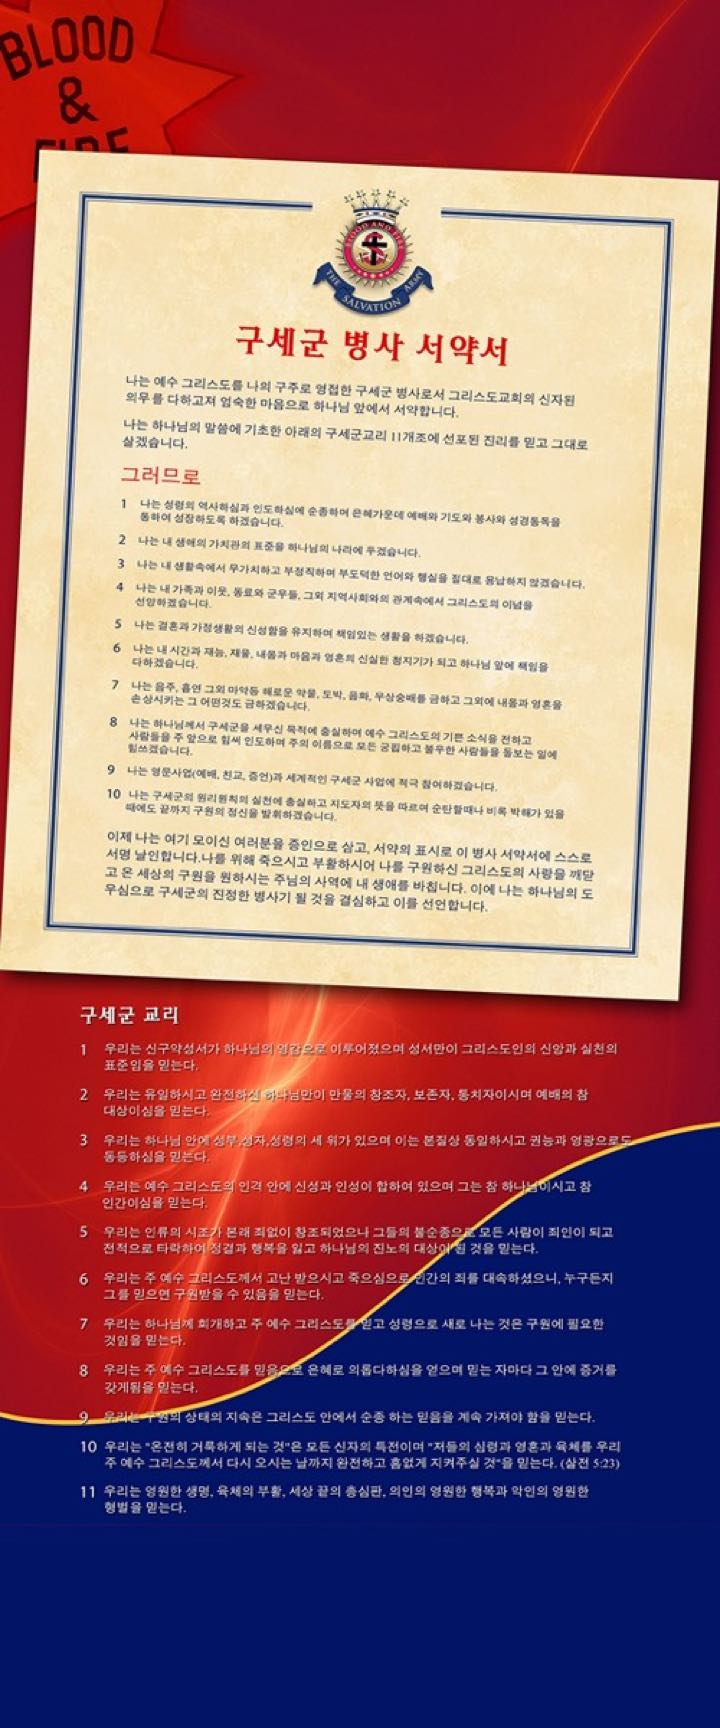 Korean doctrines and covenant Poster